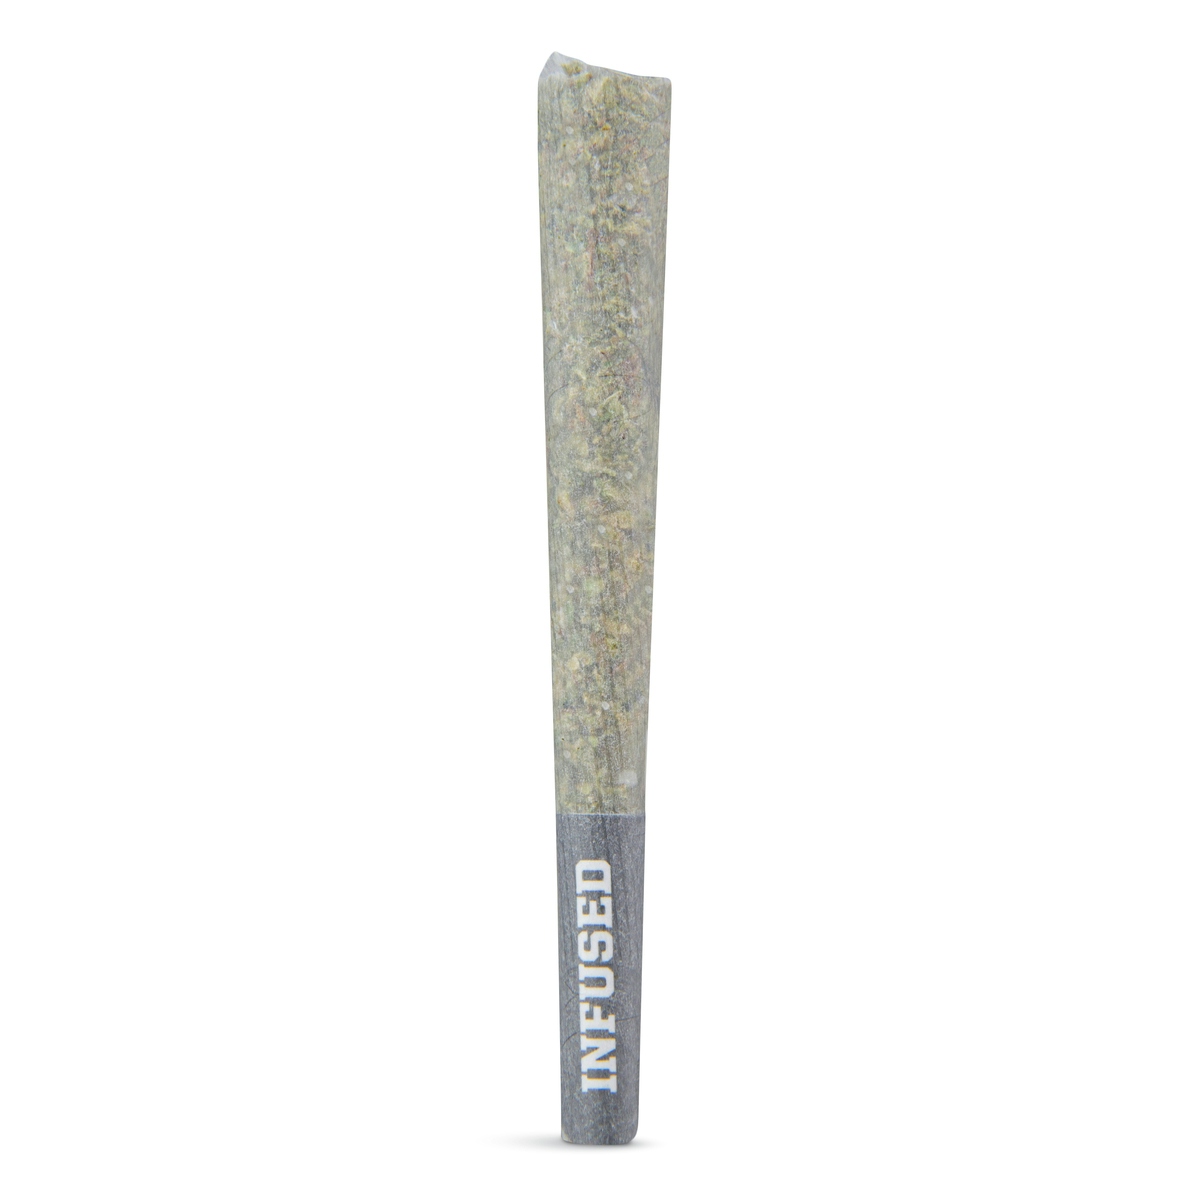 Purple Z | Indica - Diamond THCA-Infused Pre-Roll - 1G Joint